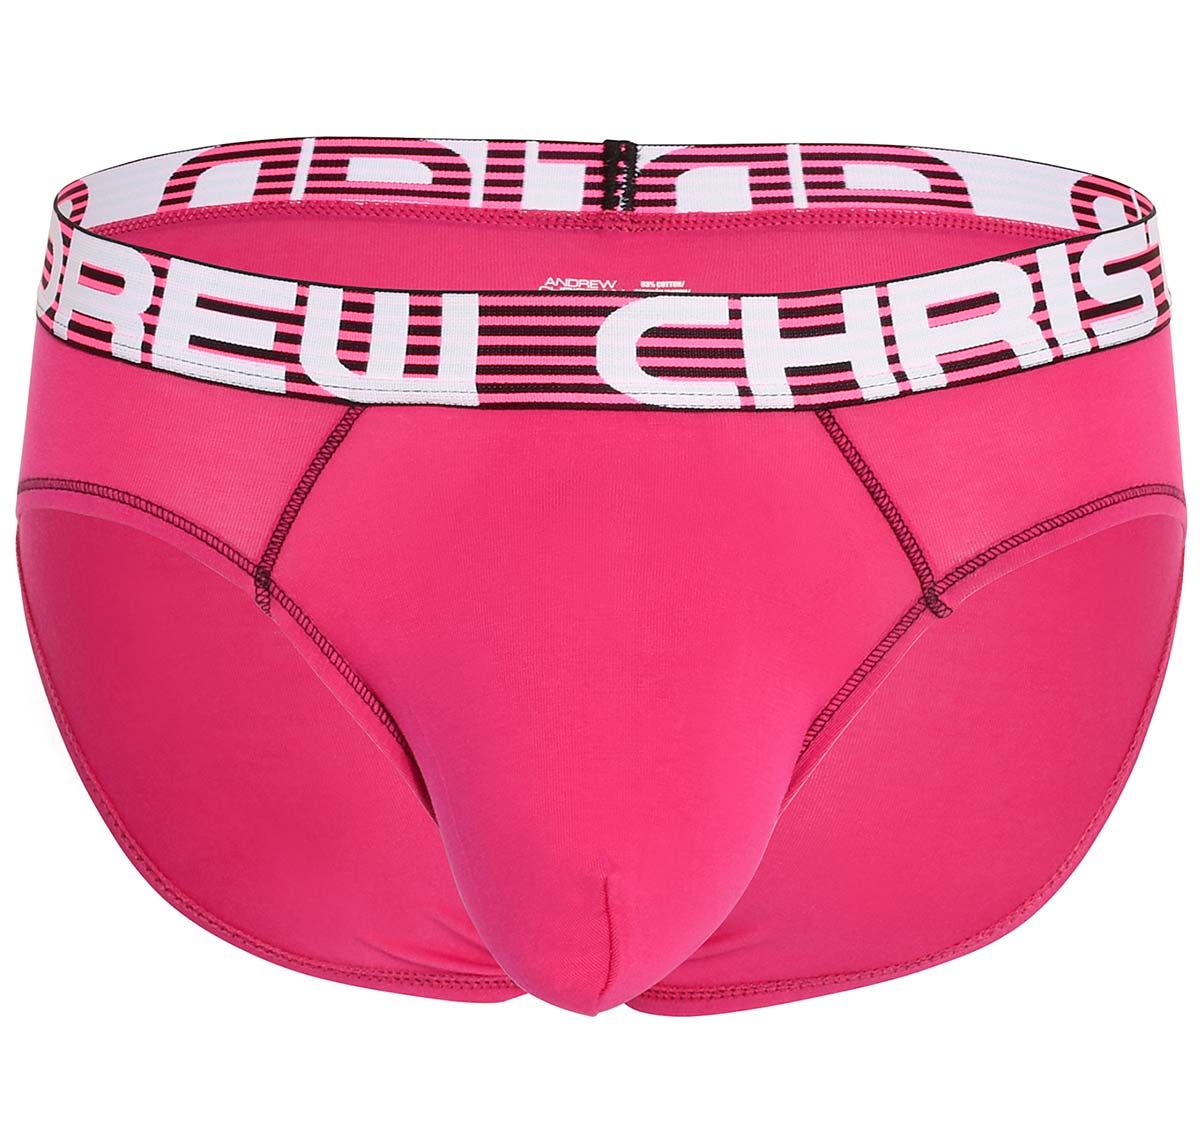 Andrew Christian Brief ALMOST NAKED COTTON BRIEF 92584, fuchsia